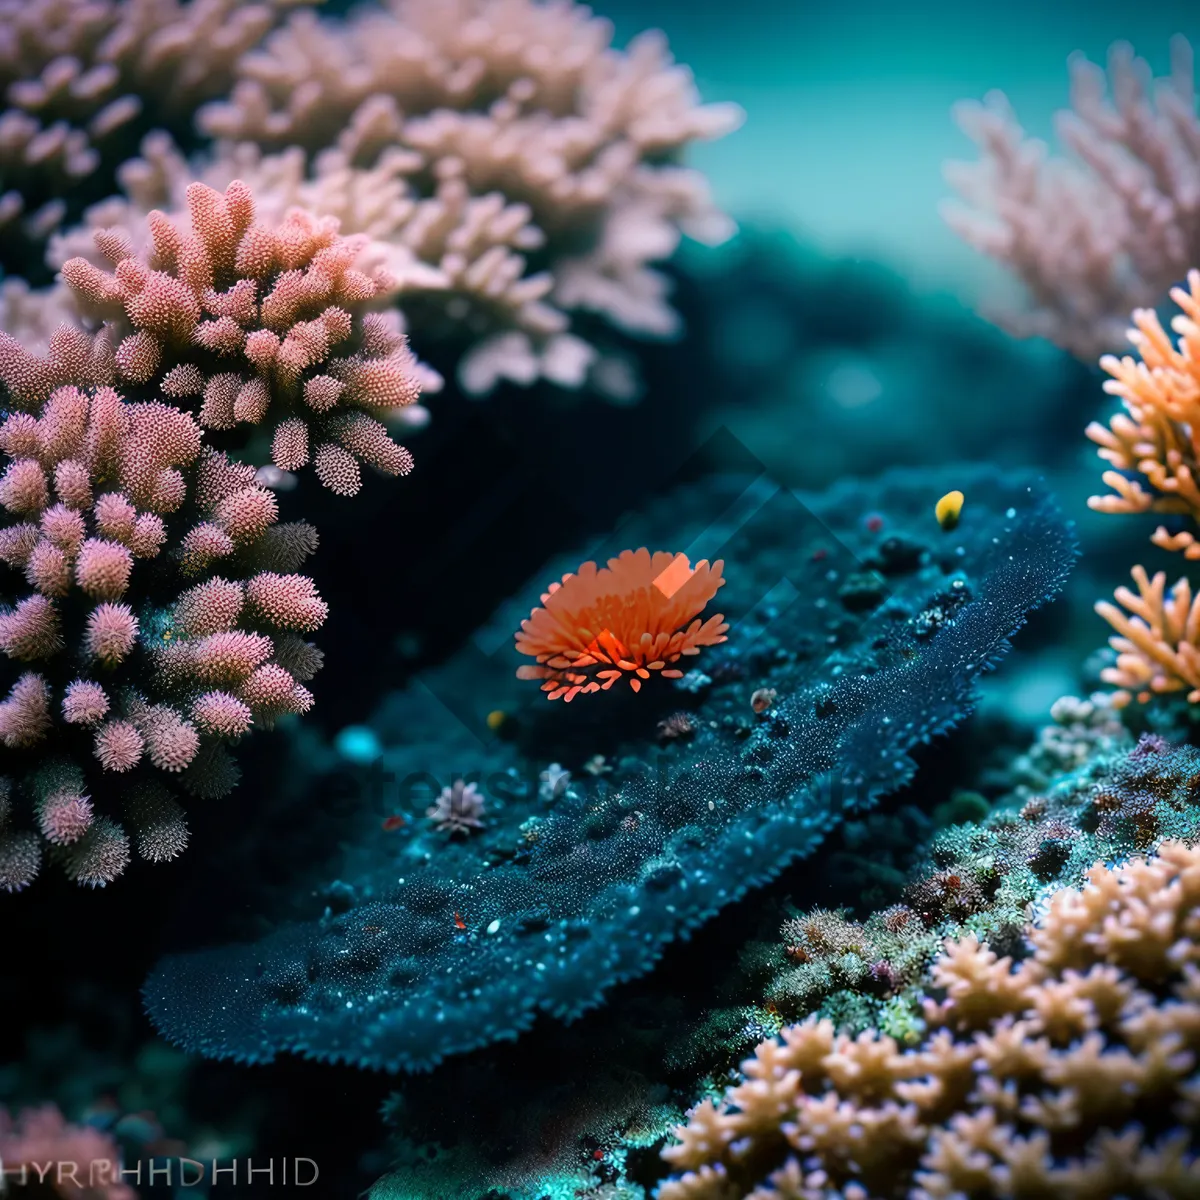 Picture of Colorful Underwater Coral Reef with Exotic Sea Urchin and Fish